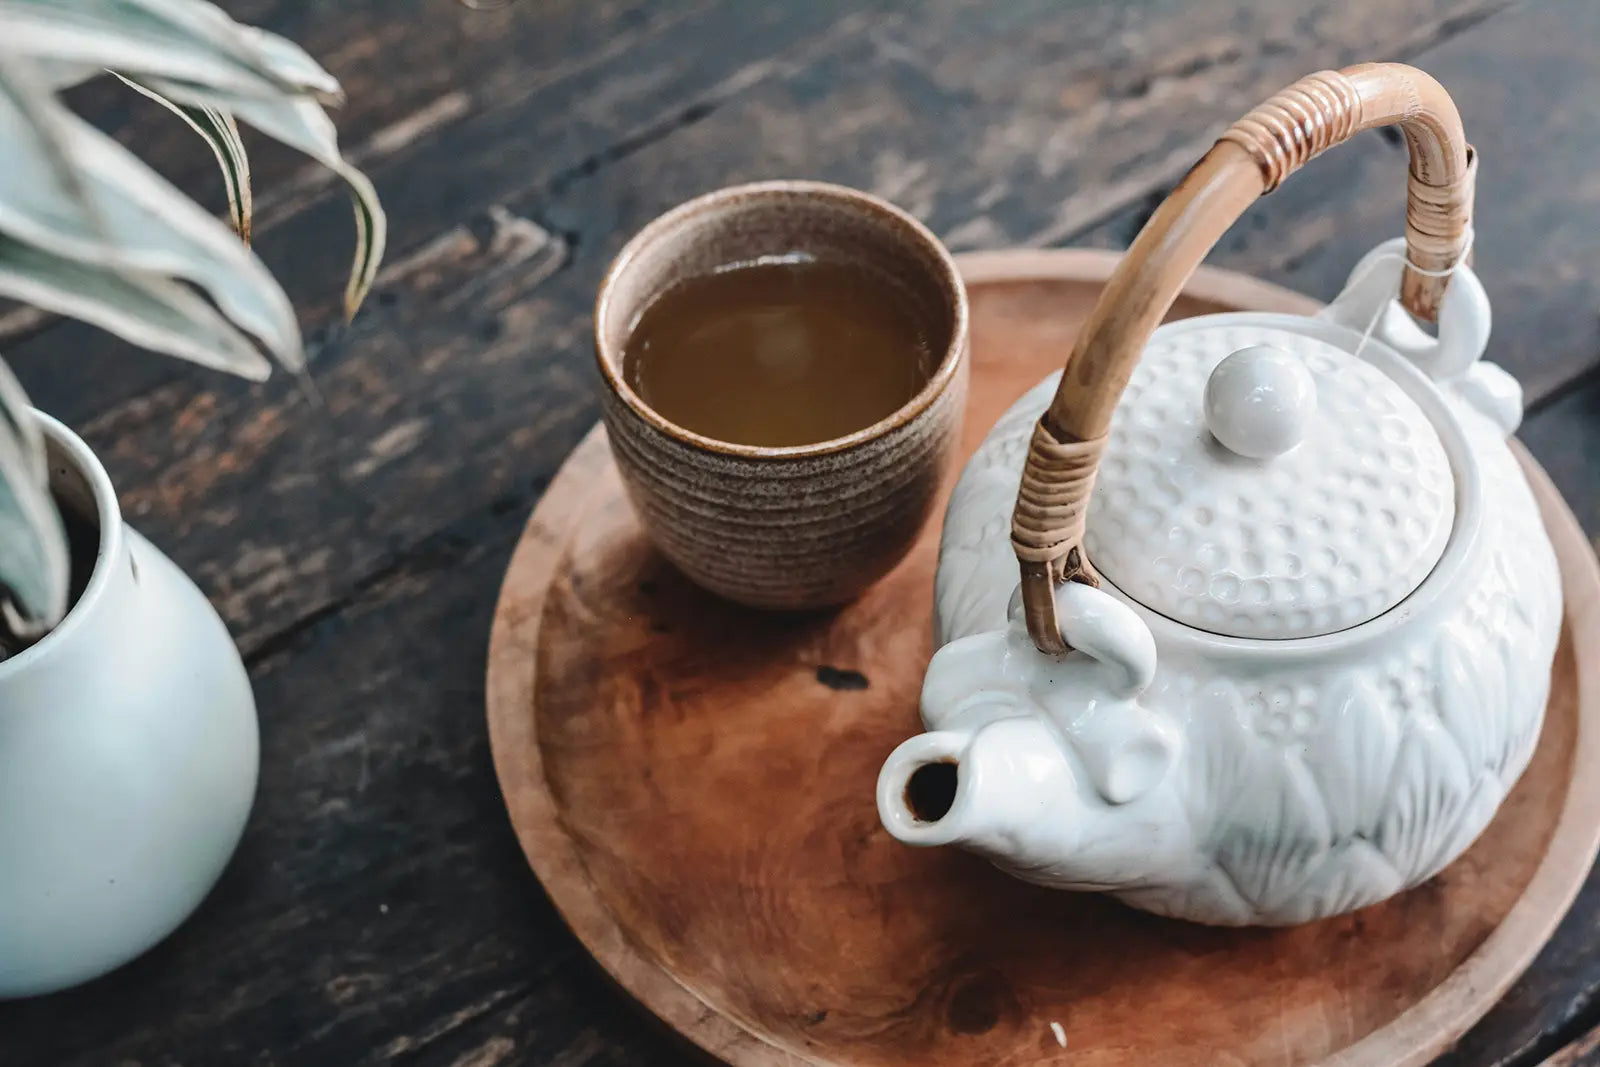 Is Tea Good for A Hangover? Find the best teas to help with you hangover